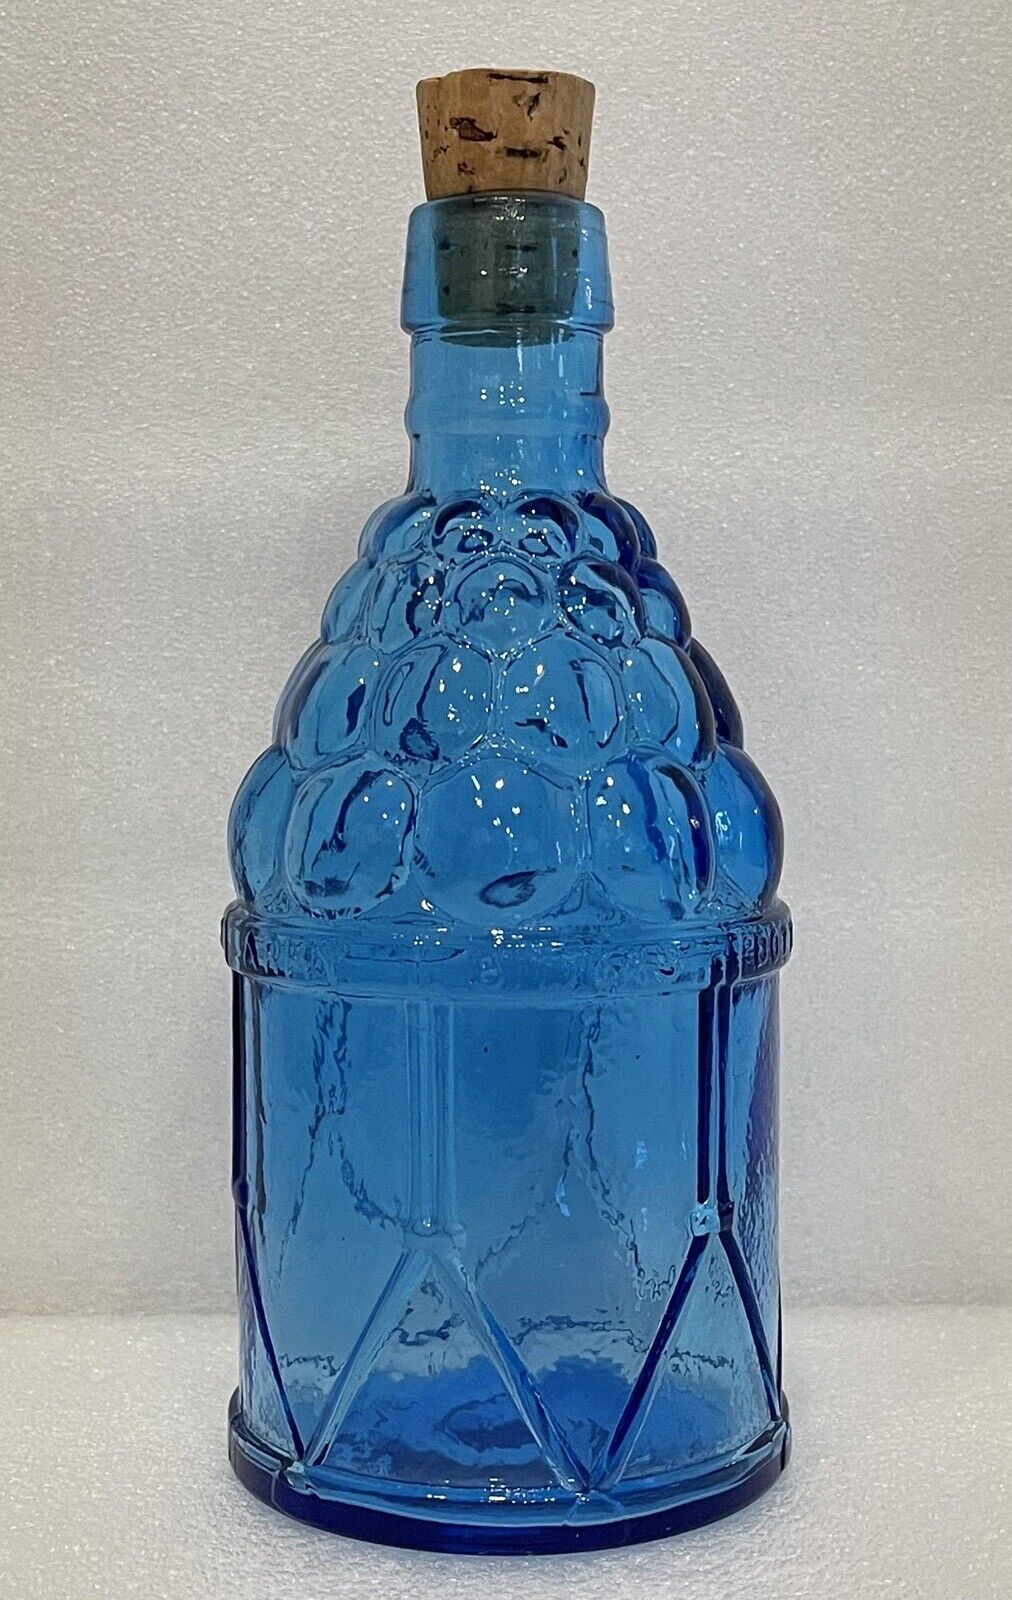 Wheaton McGivers American Army Bitters Bottle Glass Blue Cobalt Vintage 7 3/4”